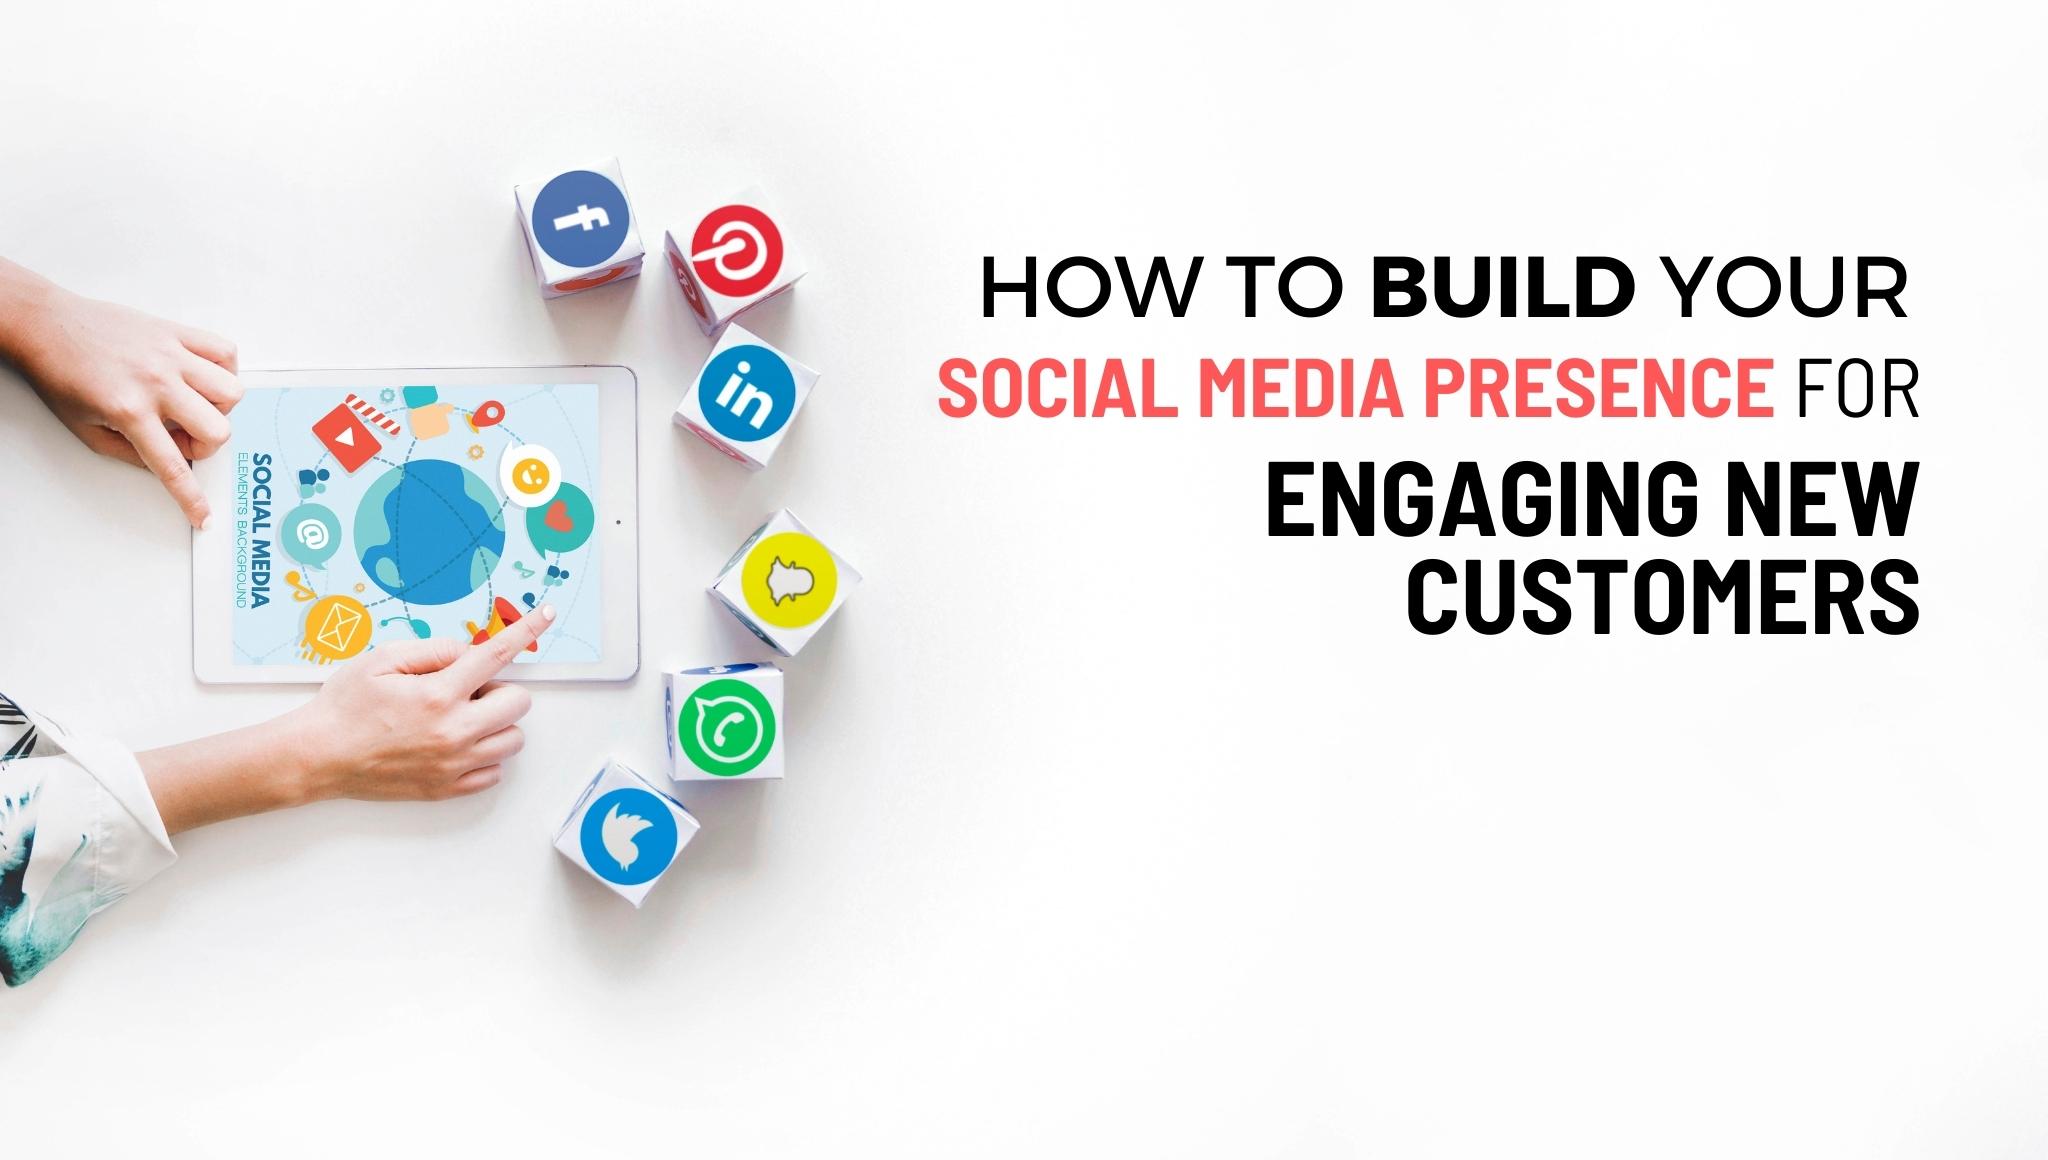 HOW TO BUILD YOUR SOCIAL MEDIA PRESENCE FOR ENGAGING NEW CUSTOMERS